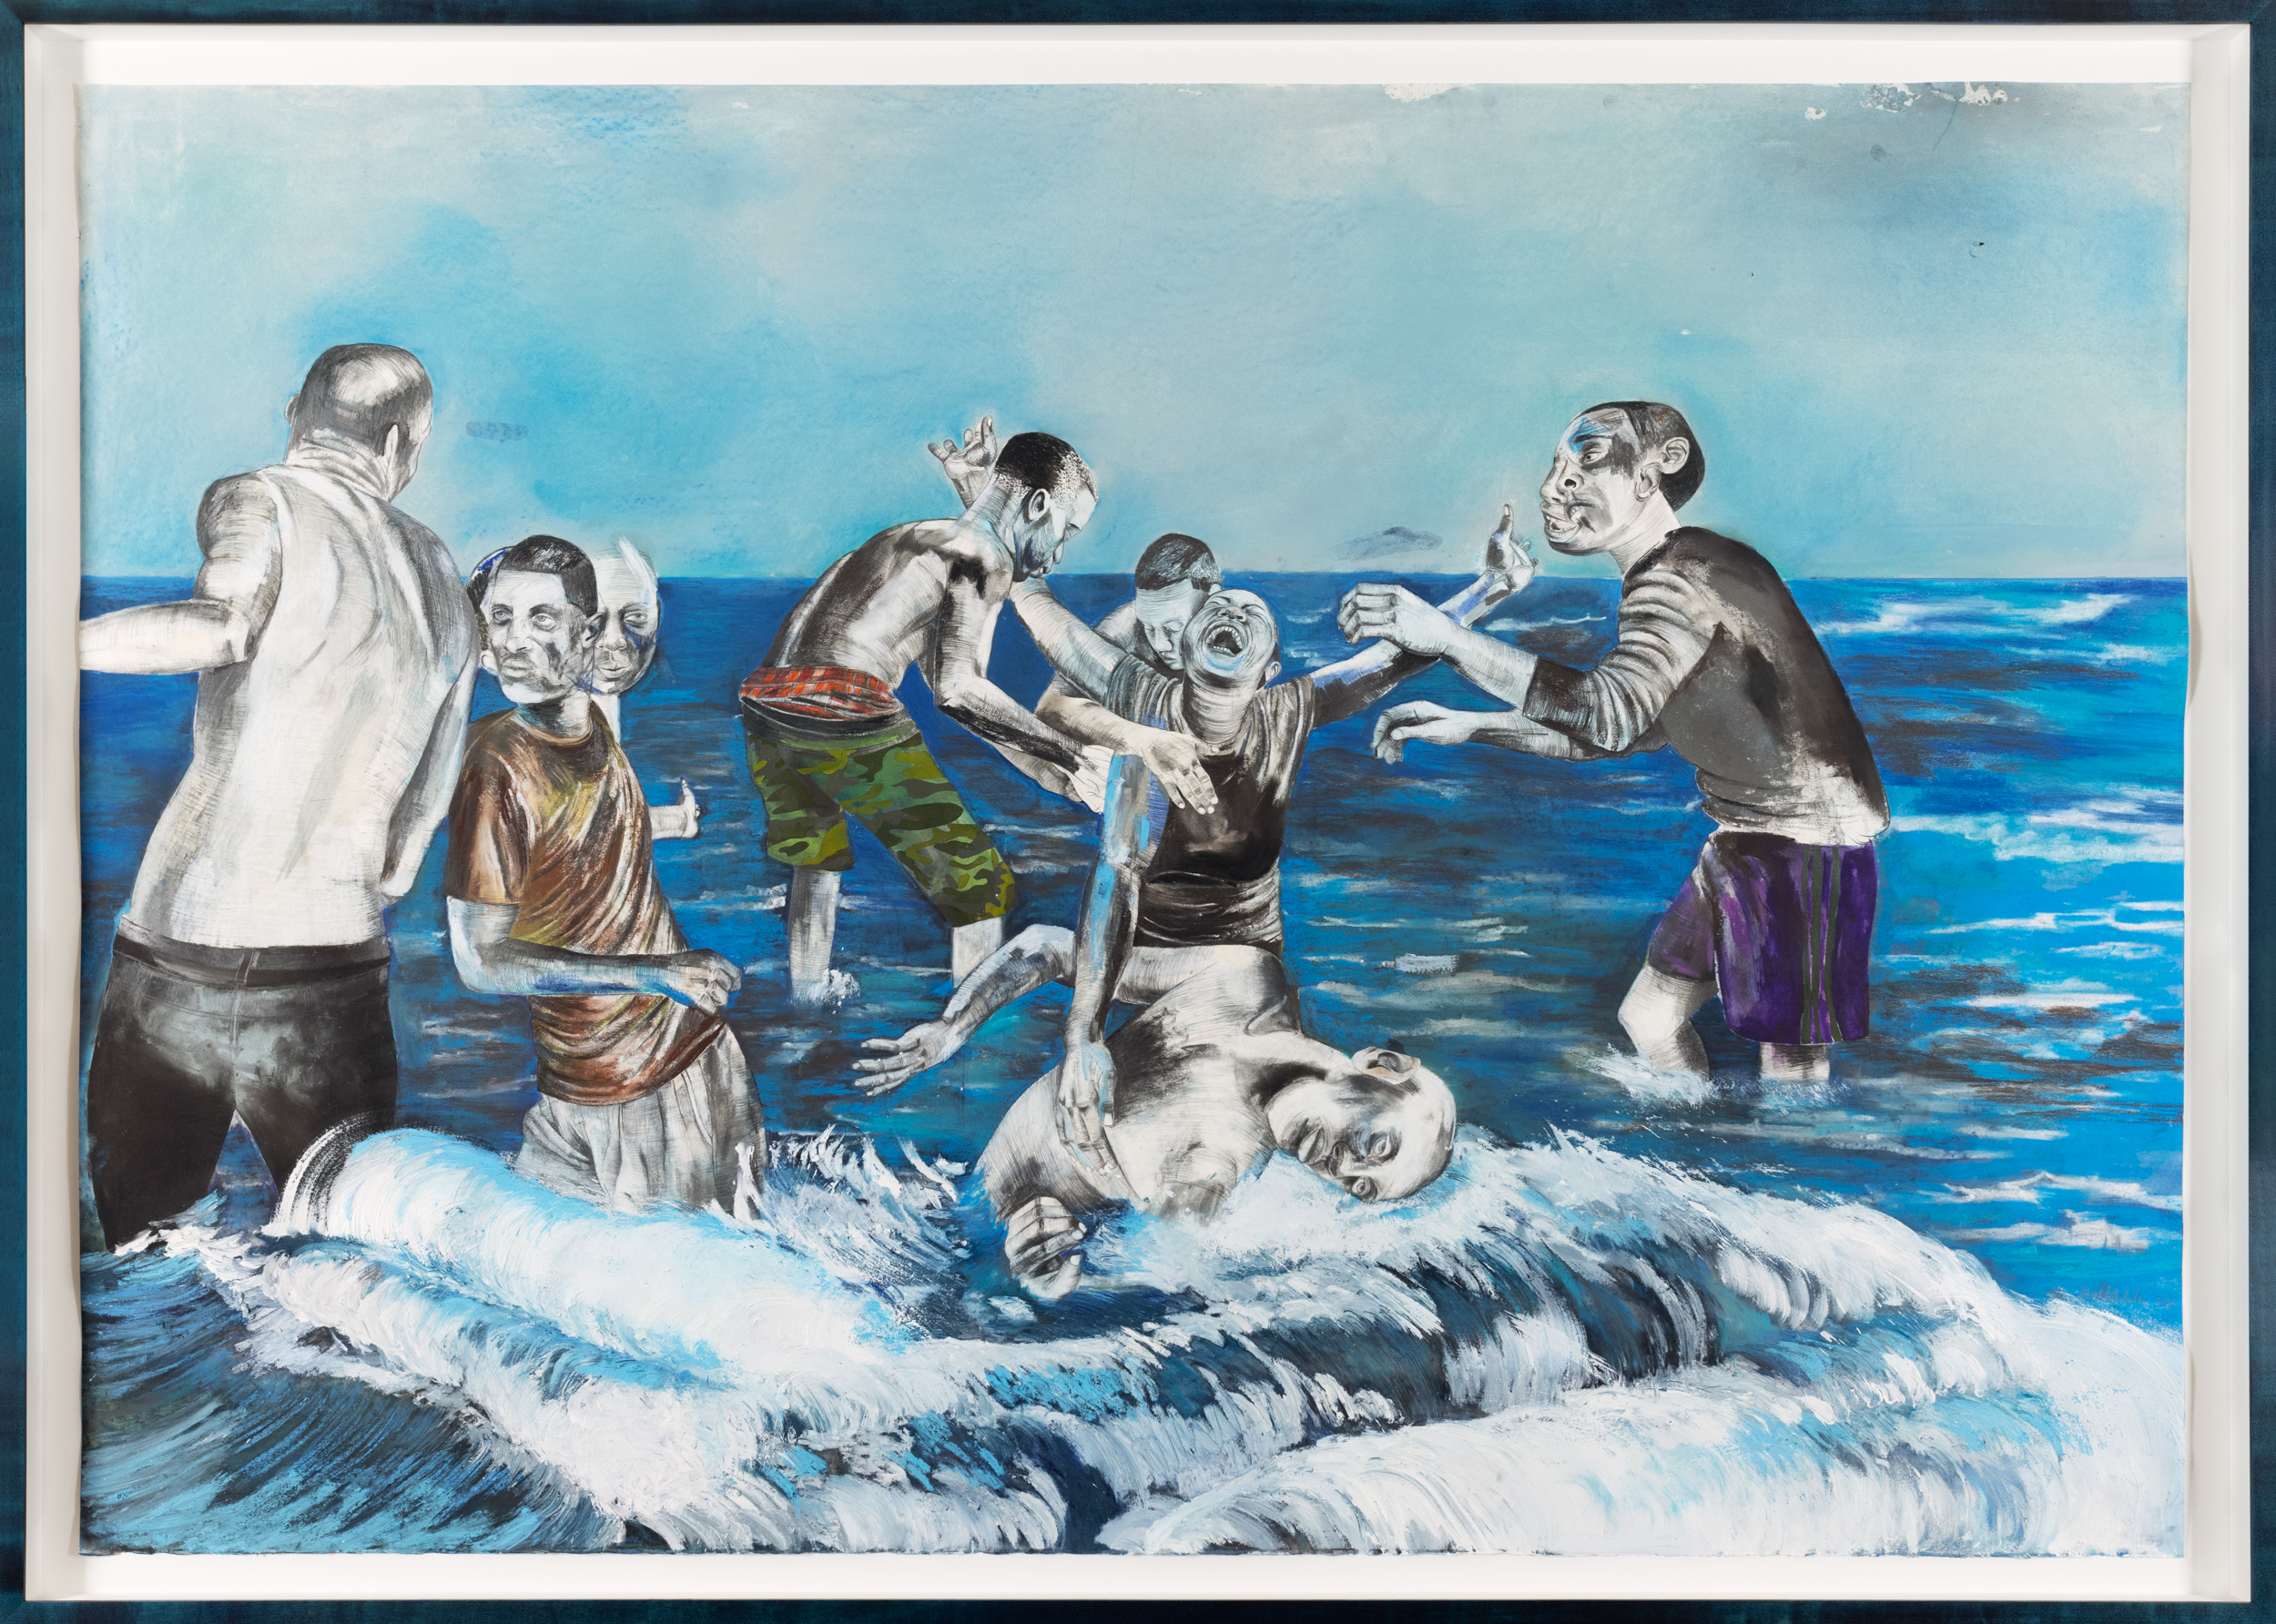 Image of a mixed media painting of a group of people playing in the shallow ocean surf framed in a blue stained wood